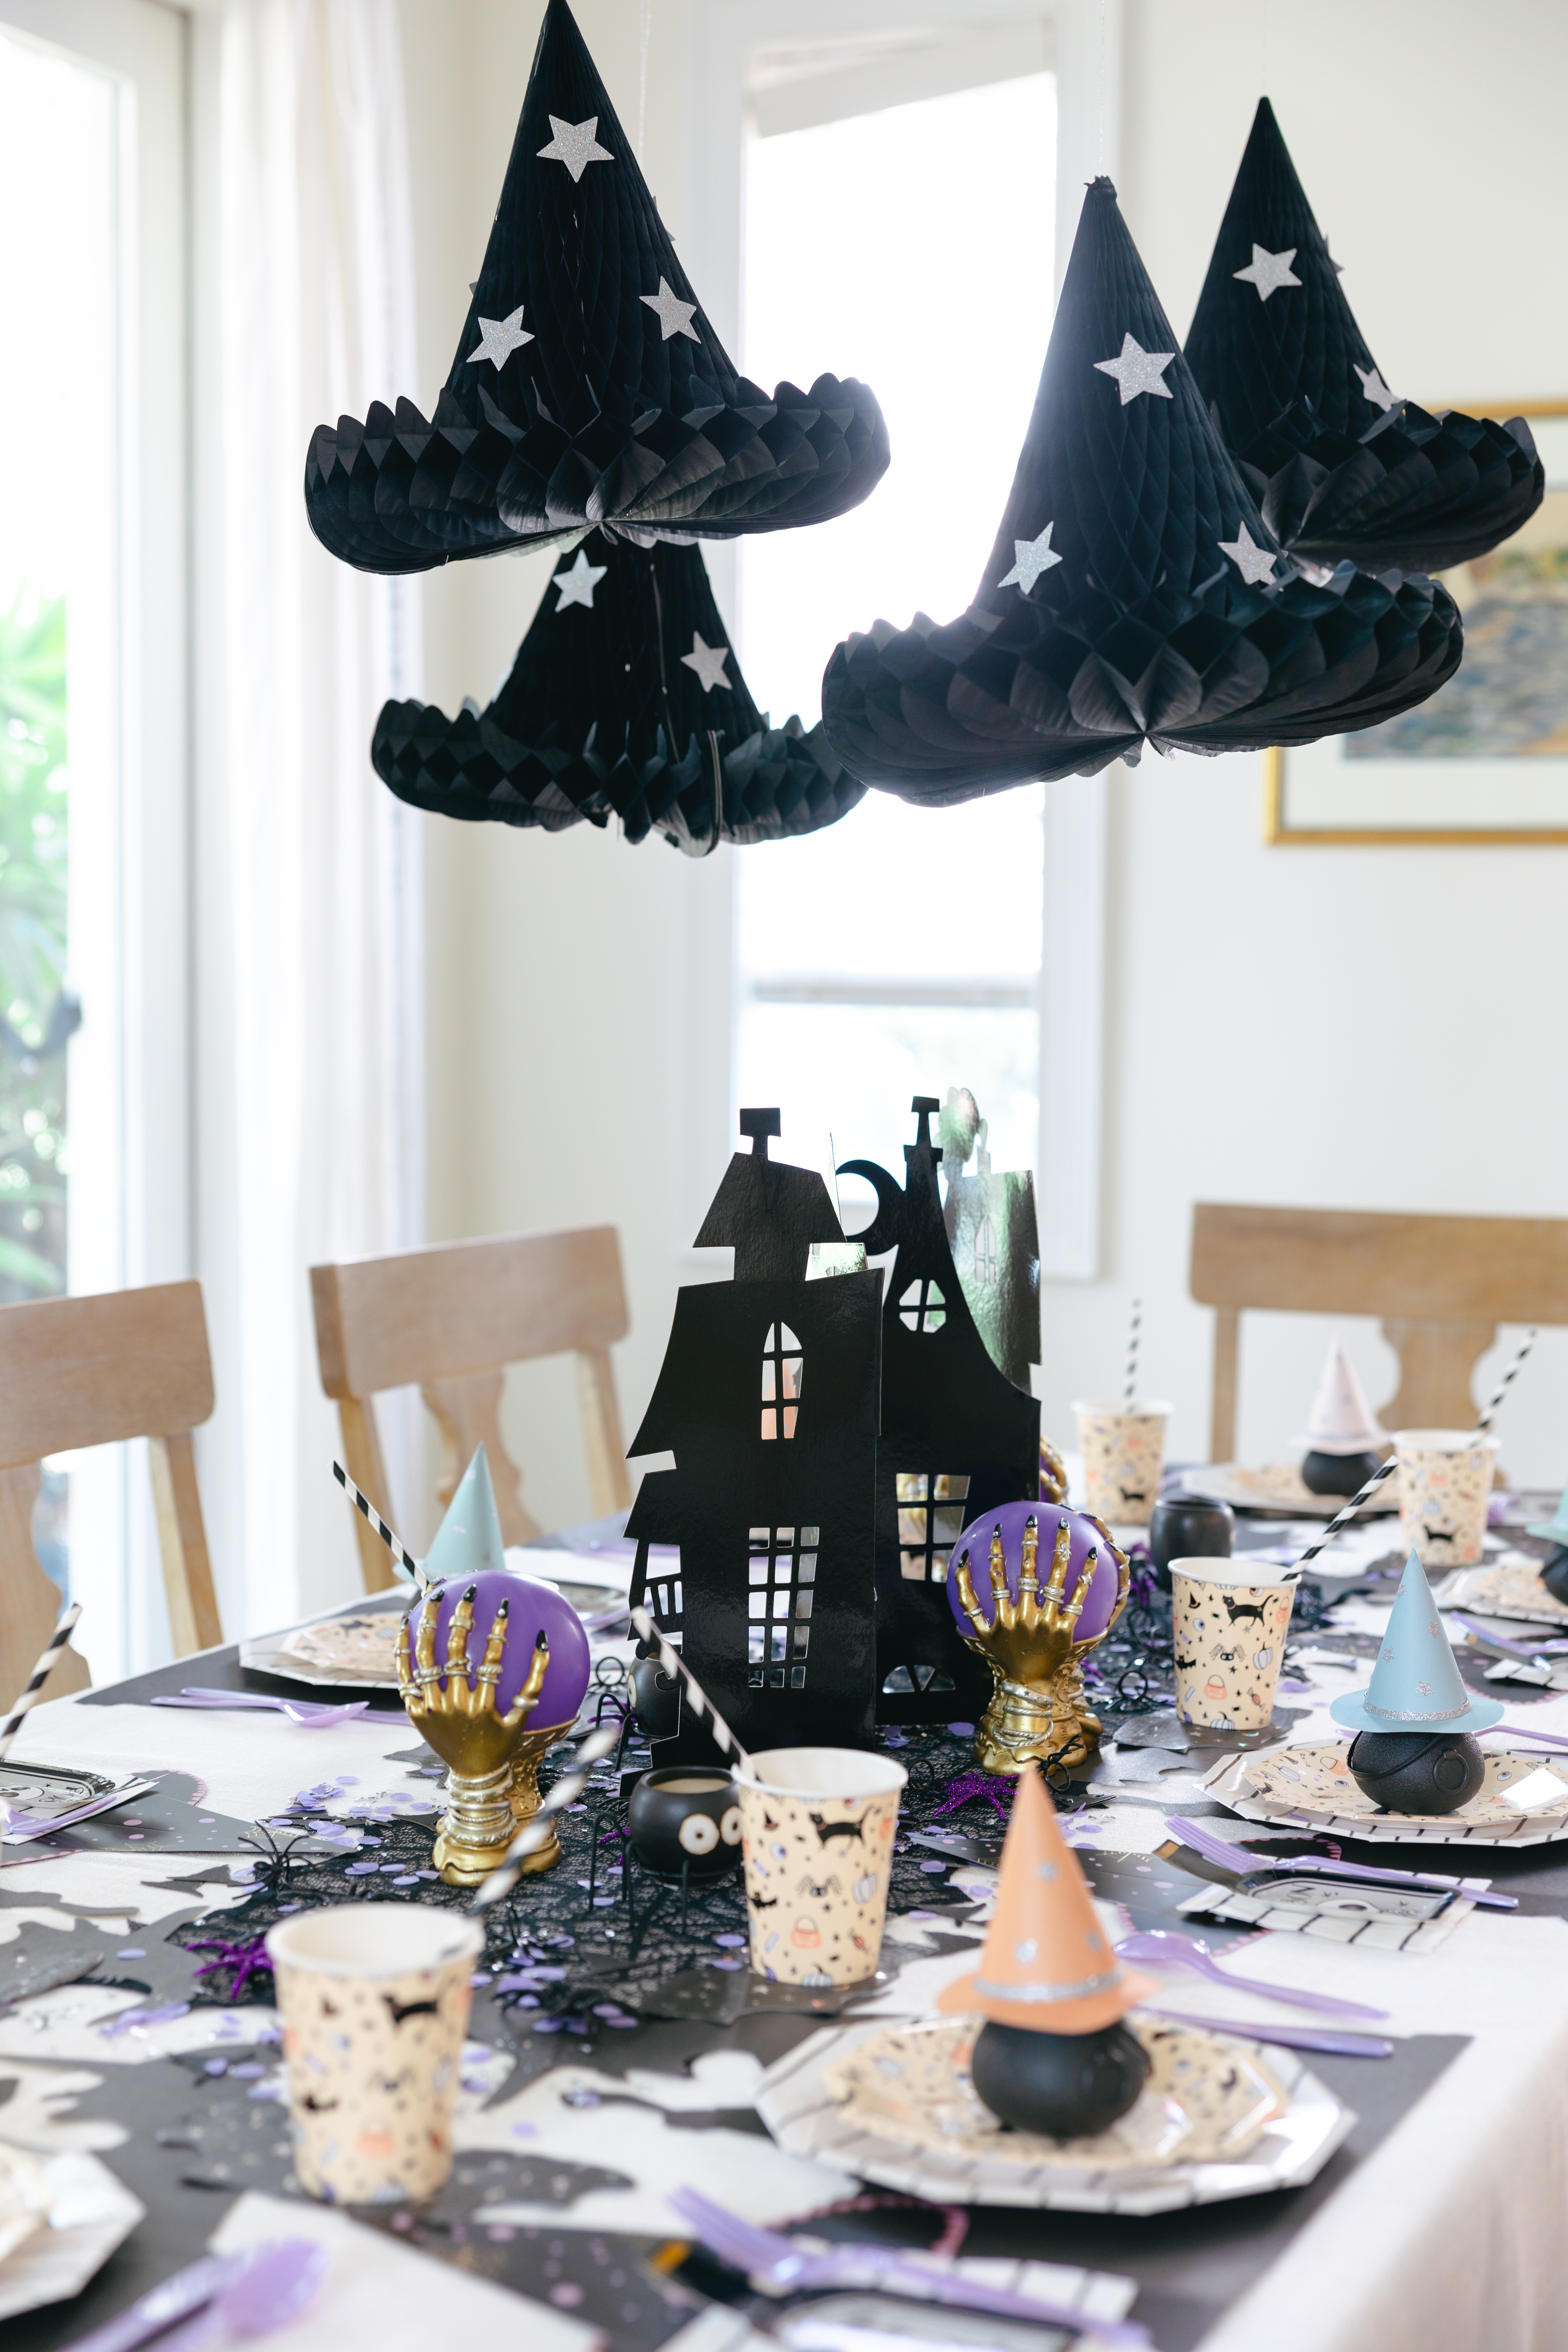 honeycomb witch hats hanging about a purple and black themed witch table with paper goods.